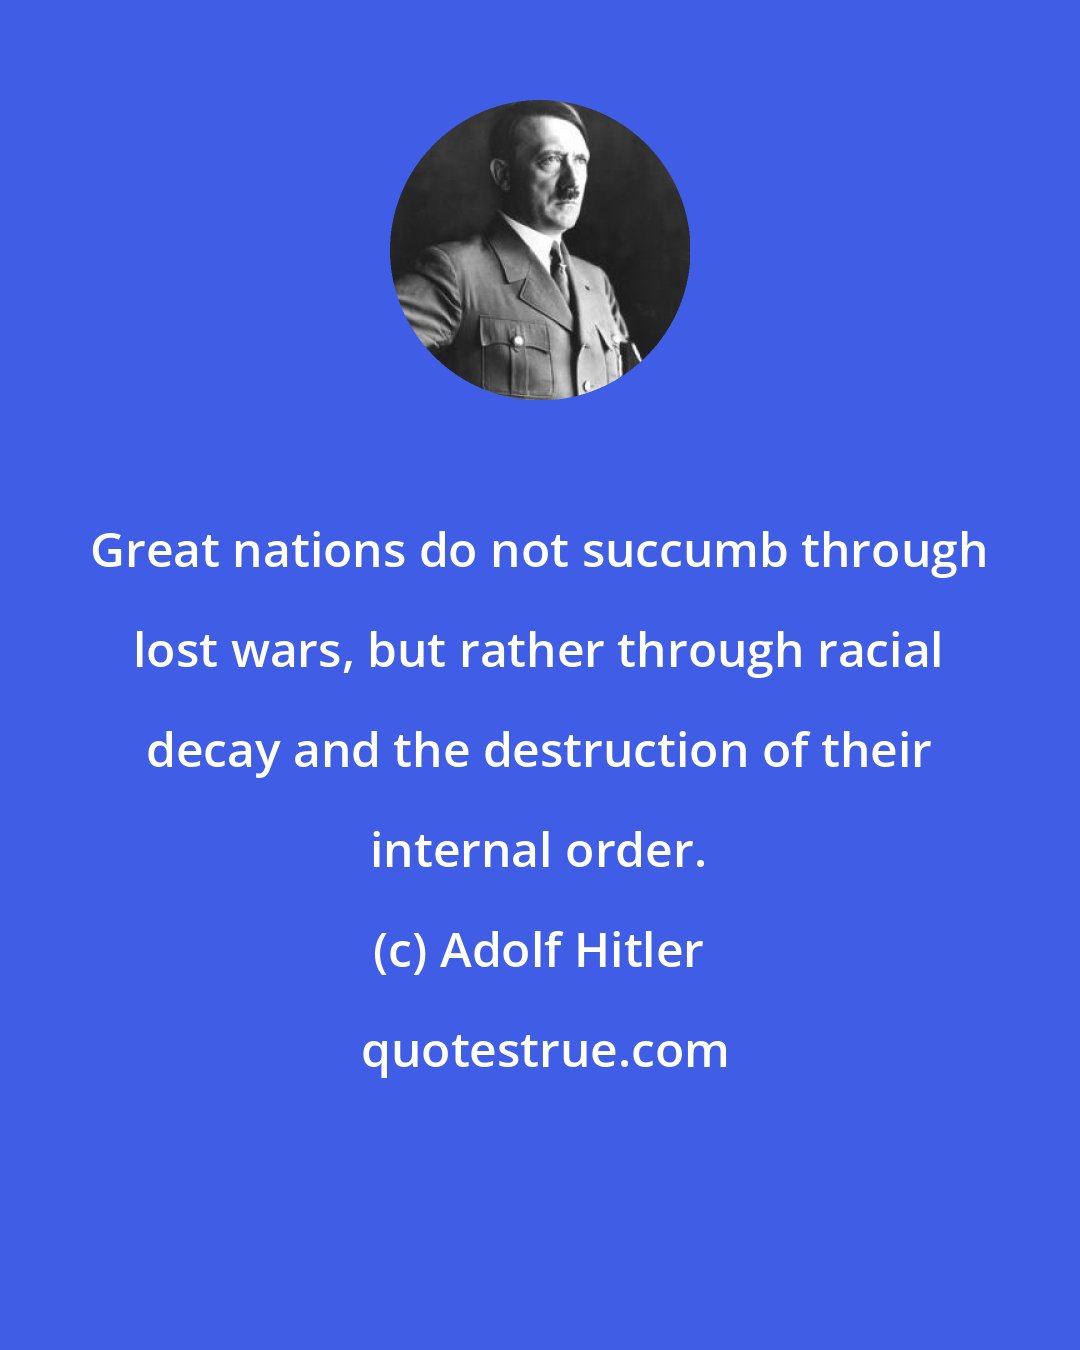 Adolf Hitler: Great nations do not succumb through lost wars, but rather through racial decay and the destruction of their internal order.